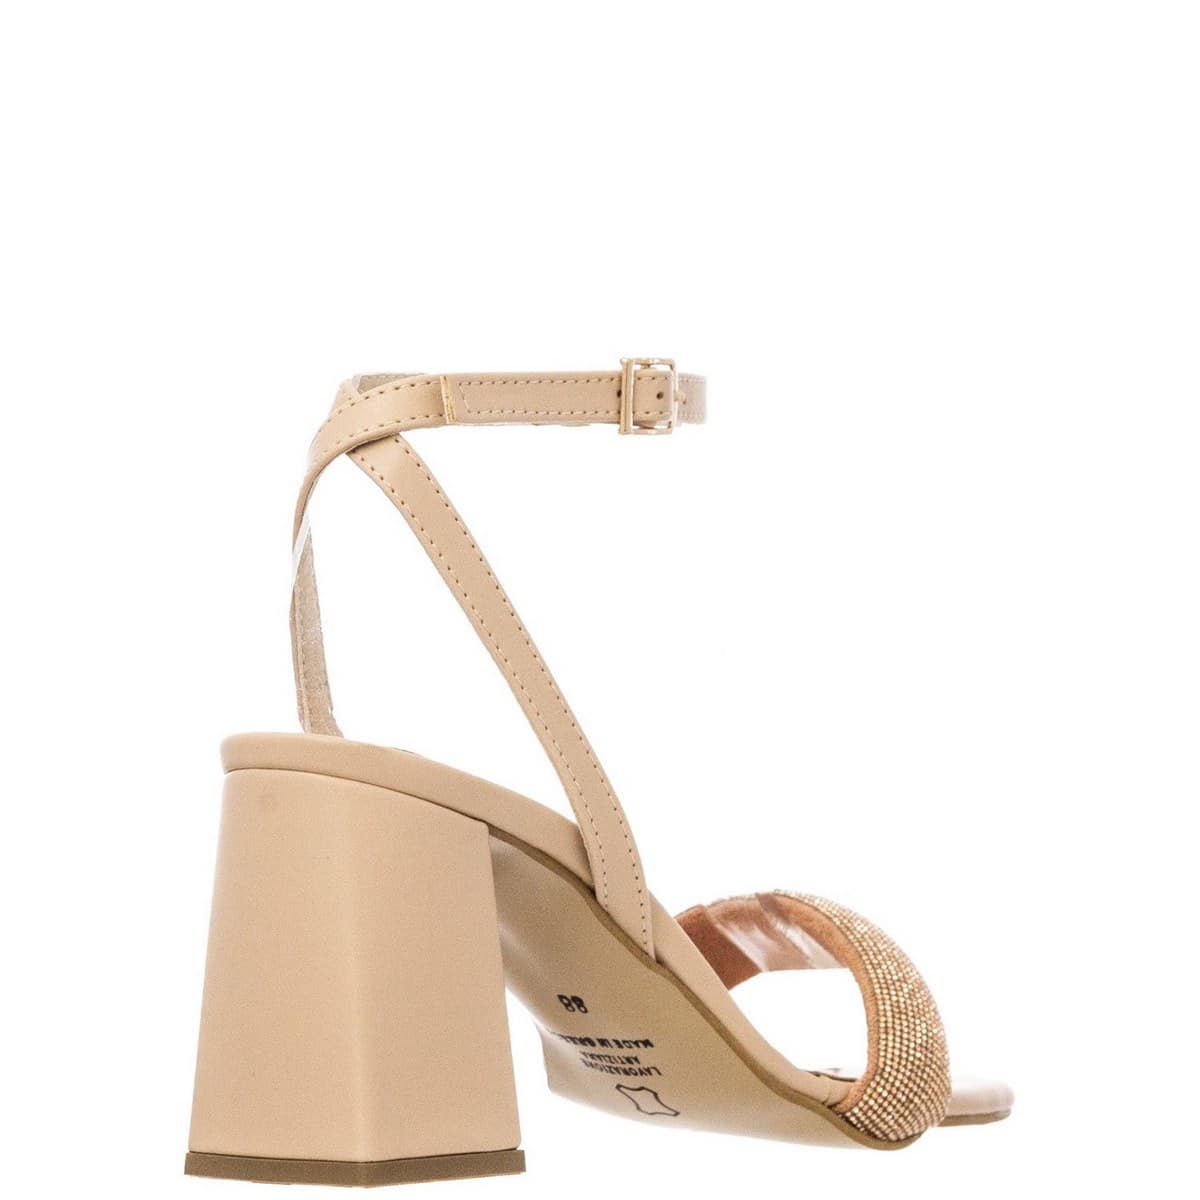 LEATHER MIDDLE HEELED SANDALS WITH STRASS 2301/7 MARIELLA FABIANI NUDE